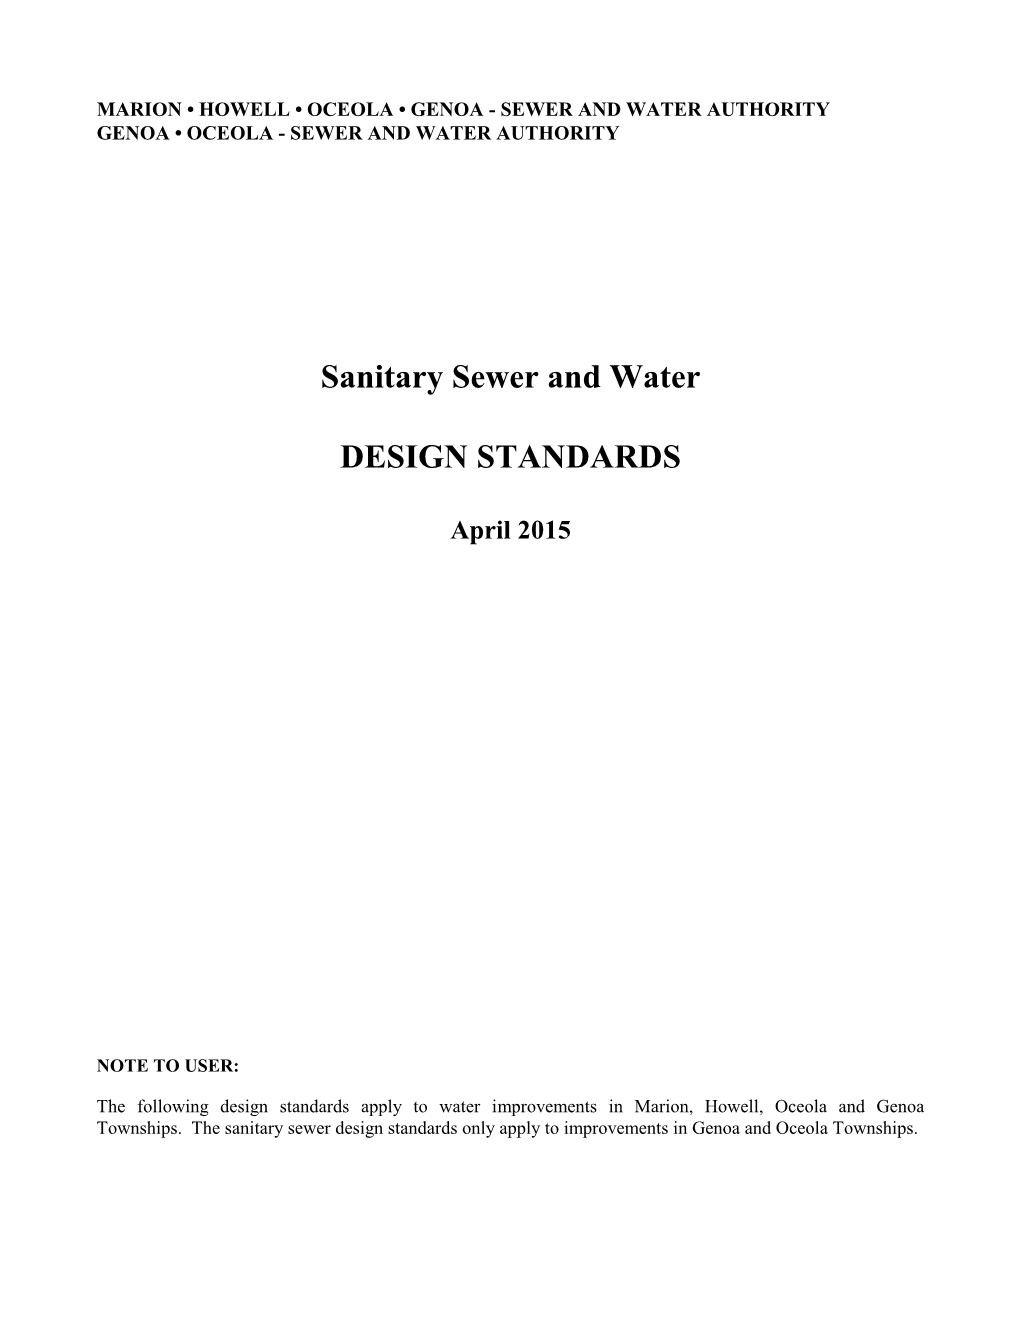 Sanitary Sewer and Water DESIGN STANDARDS